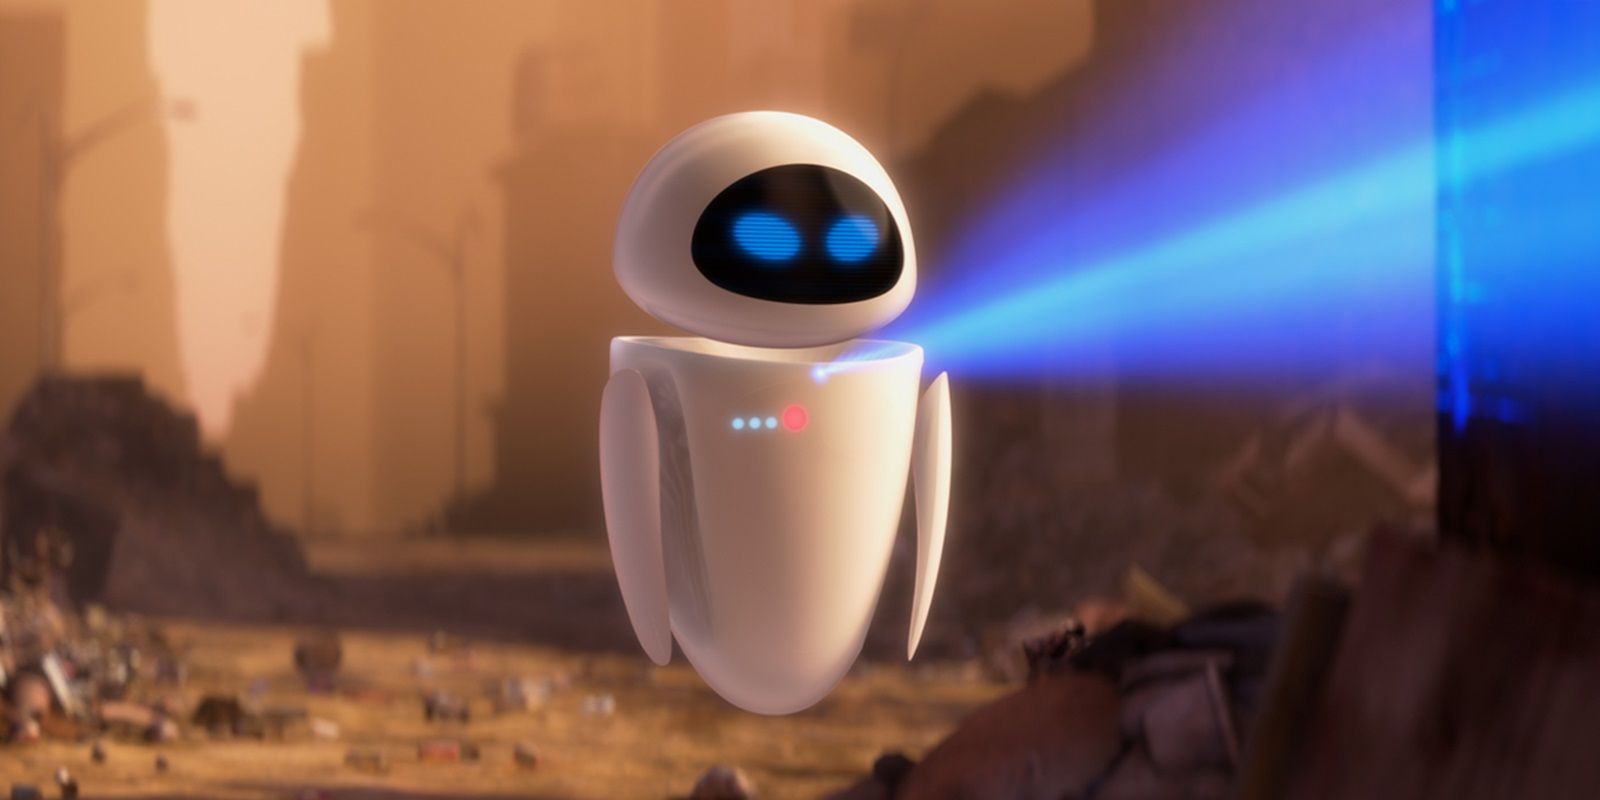 EVE scans a street in WALL-E